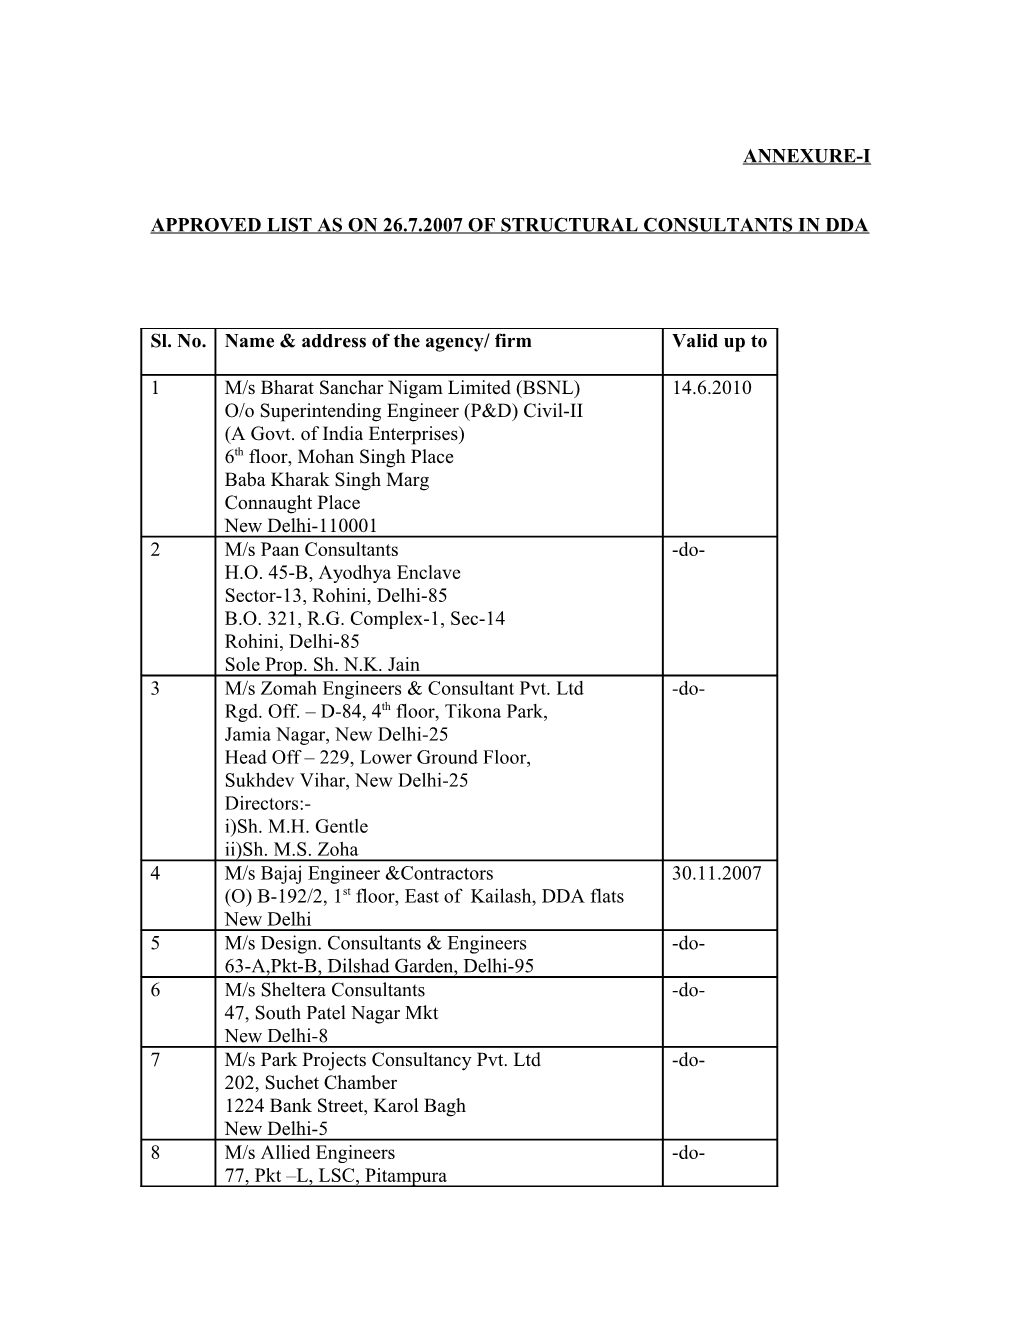 Approved List As on 26.7.2007 of Structural Consultants in Dda